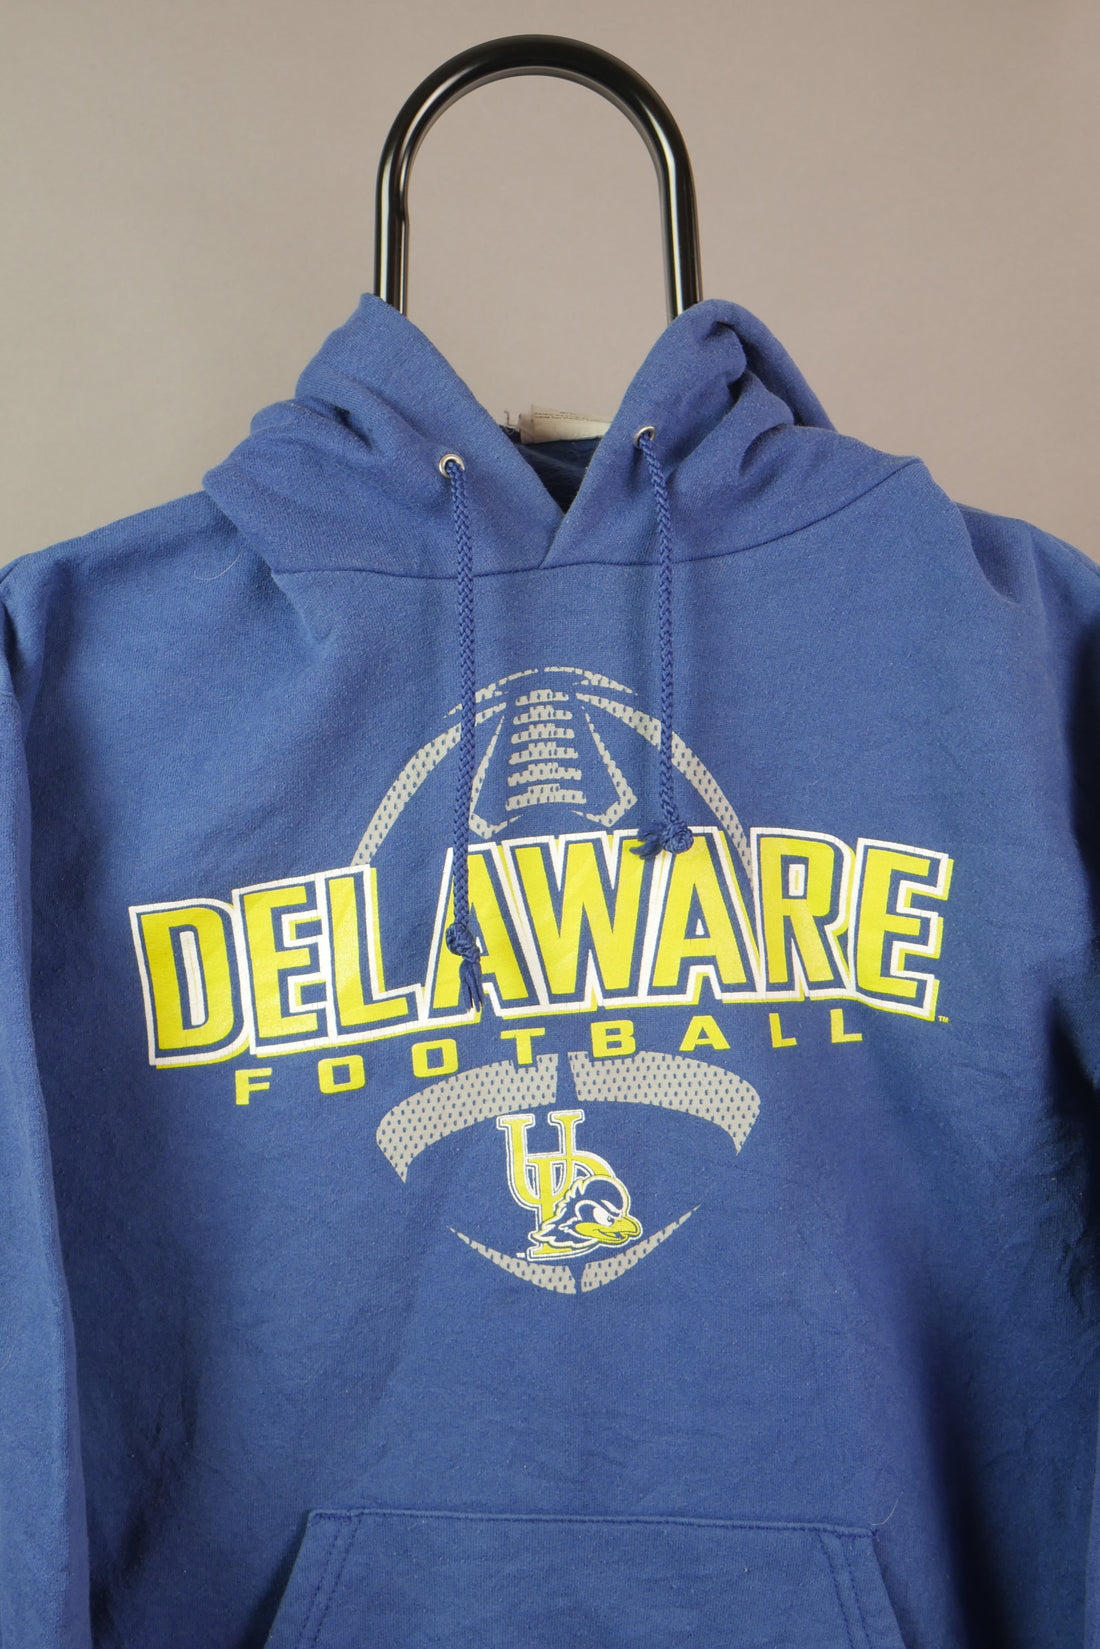 The Champion Delaware Hoodie (L)